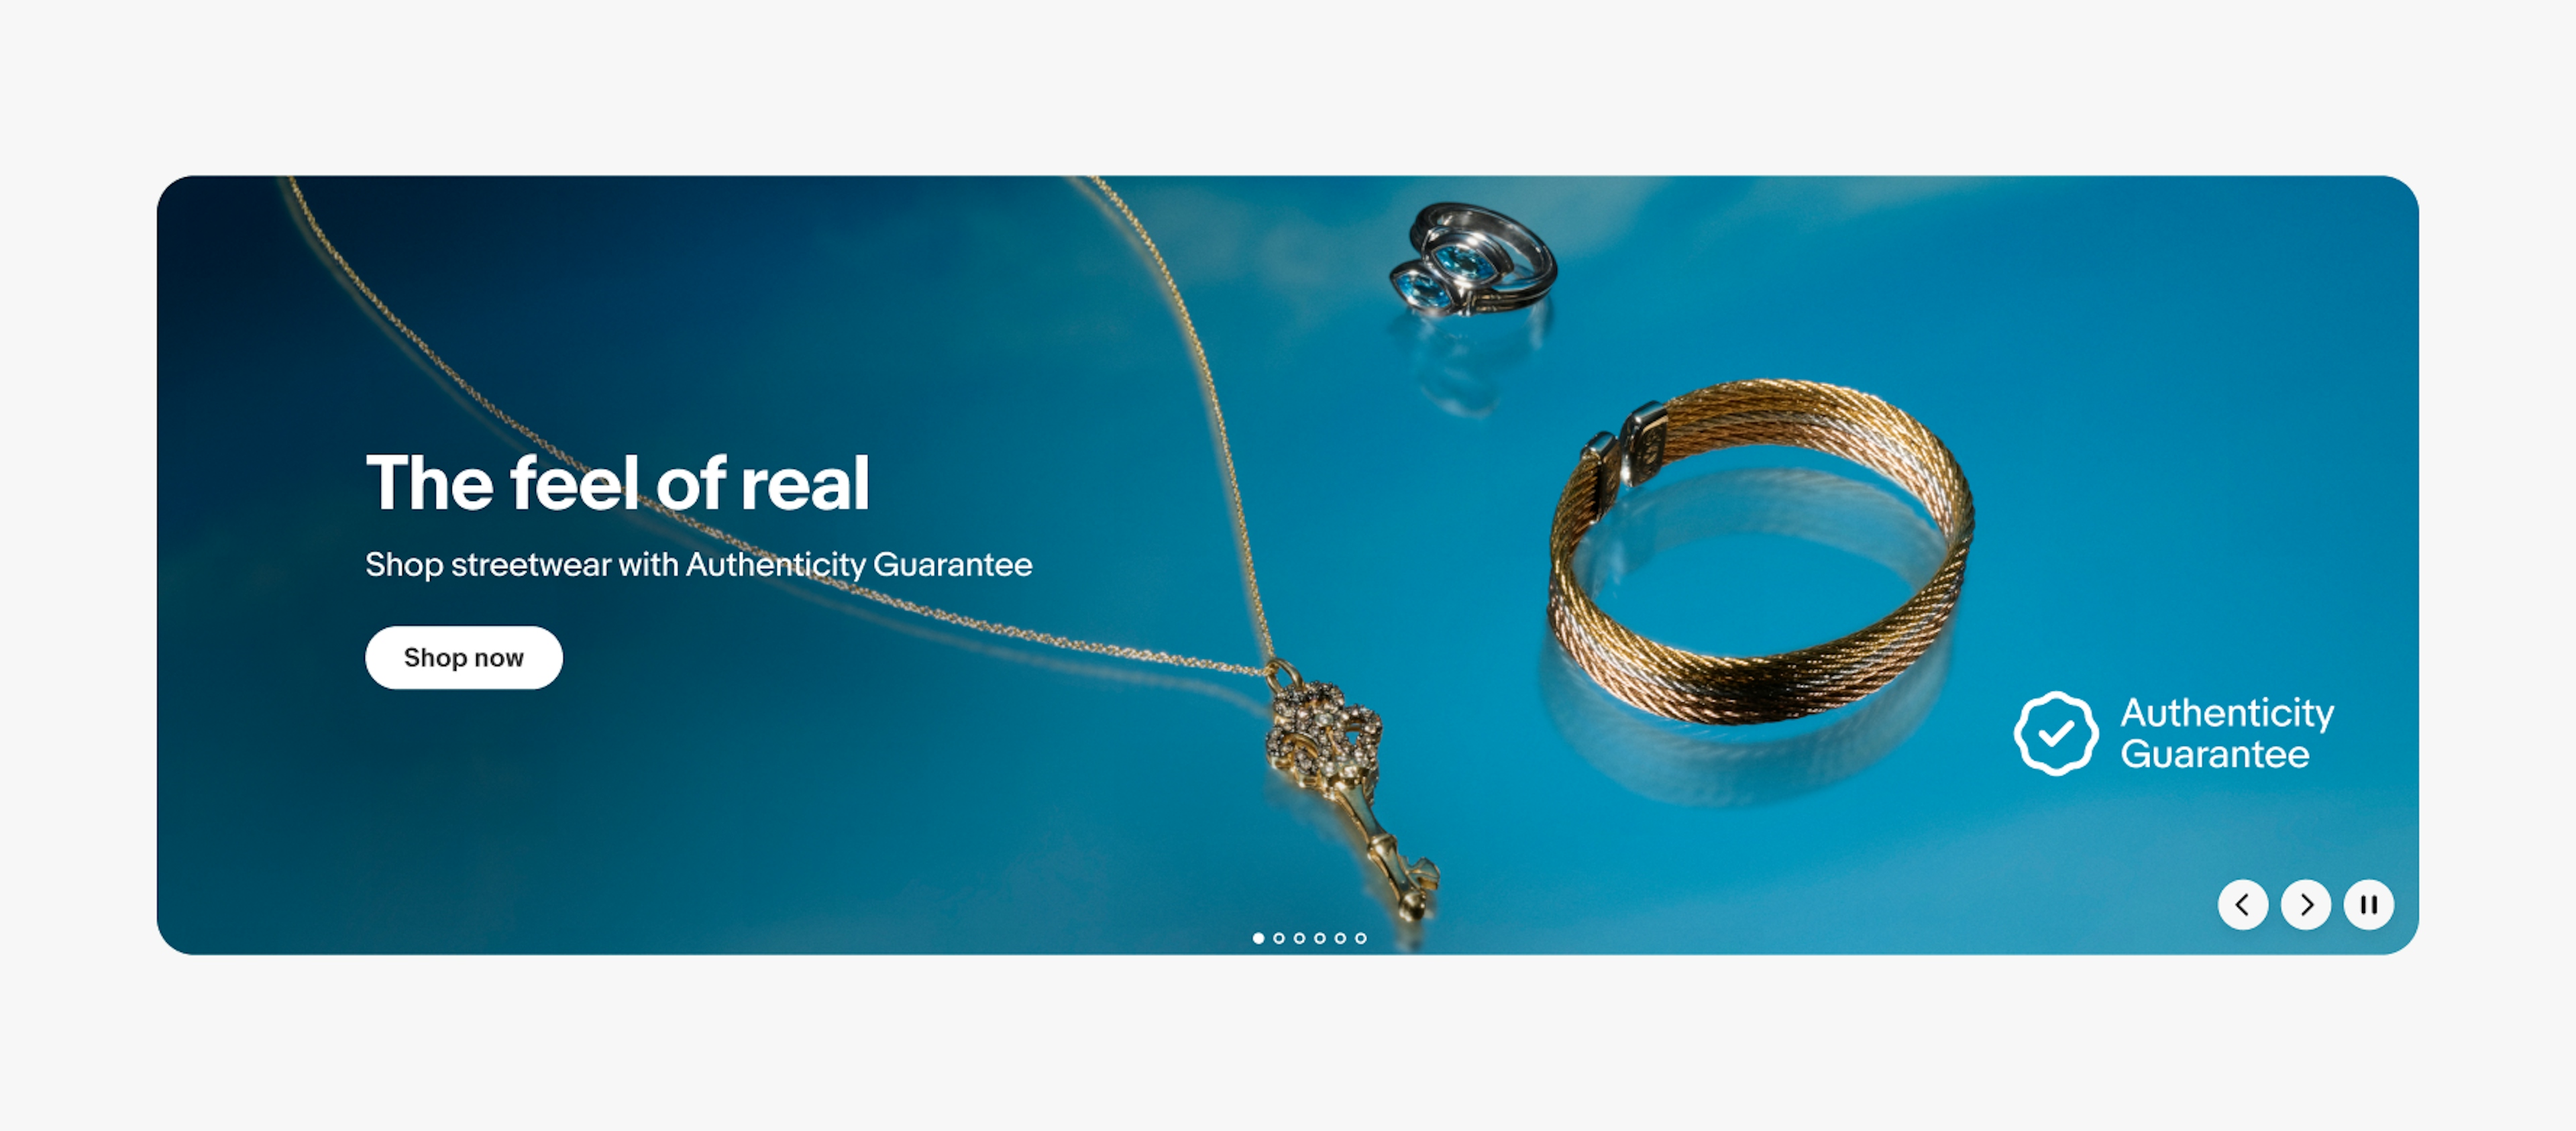 A large product banner with text on the left side containing a headline, subline, and cta button. The image contains a vibrant blue background with 3 types of jewelry. The program badge is randomly placed on the right side of the banner.